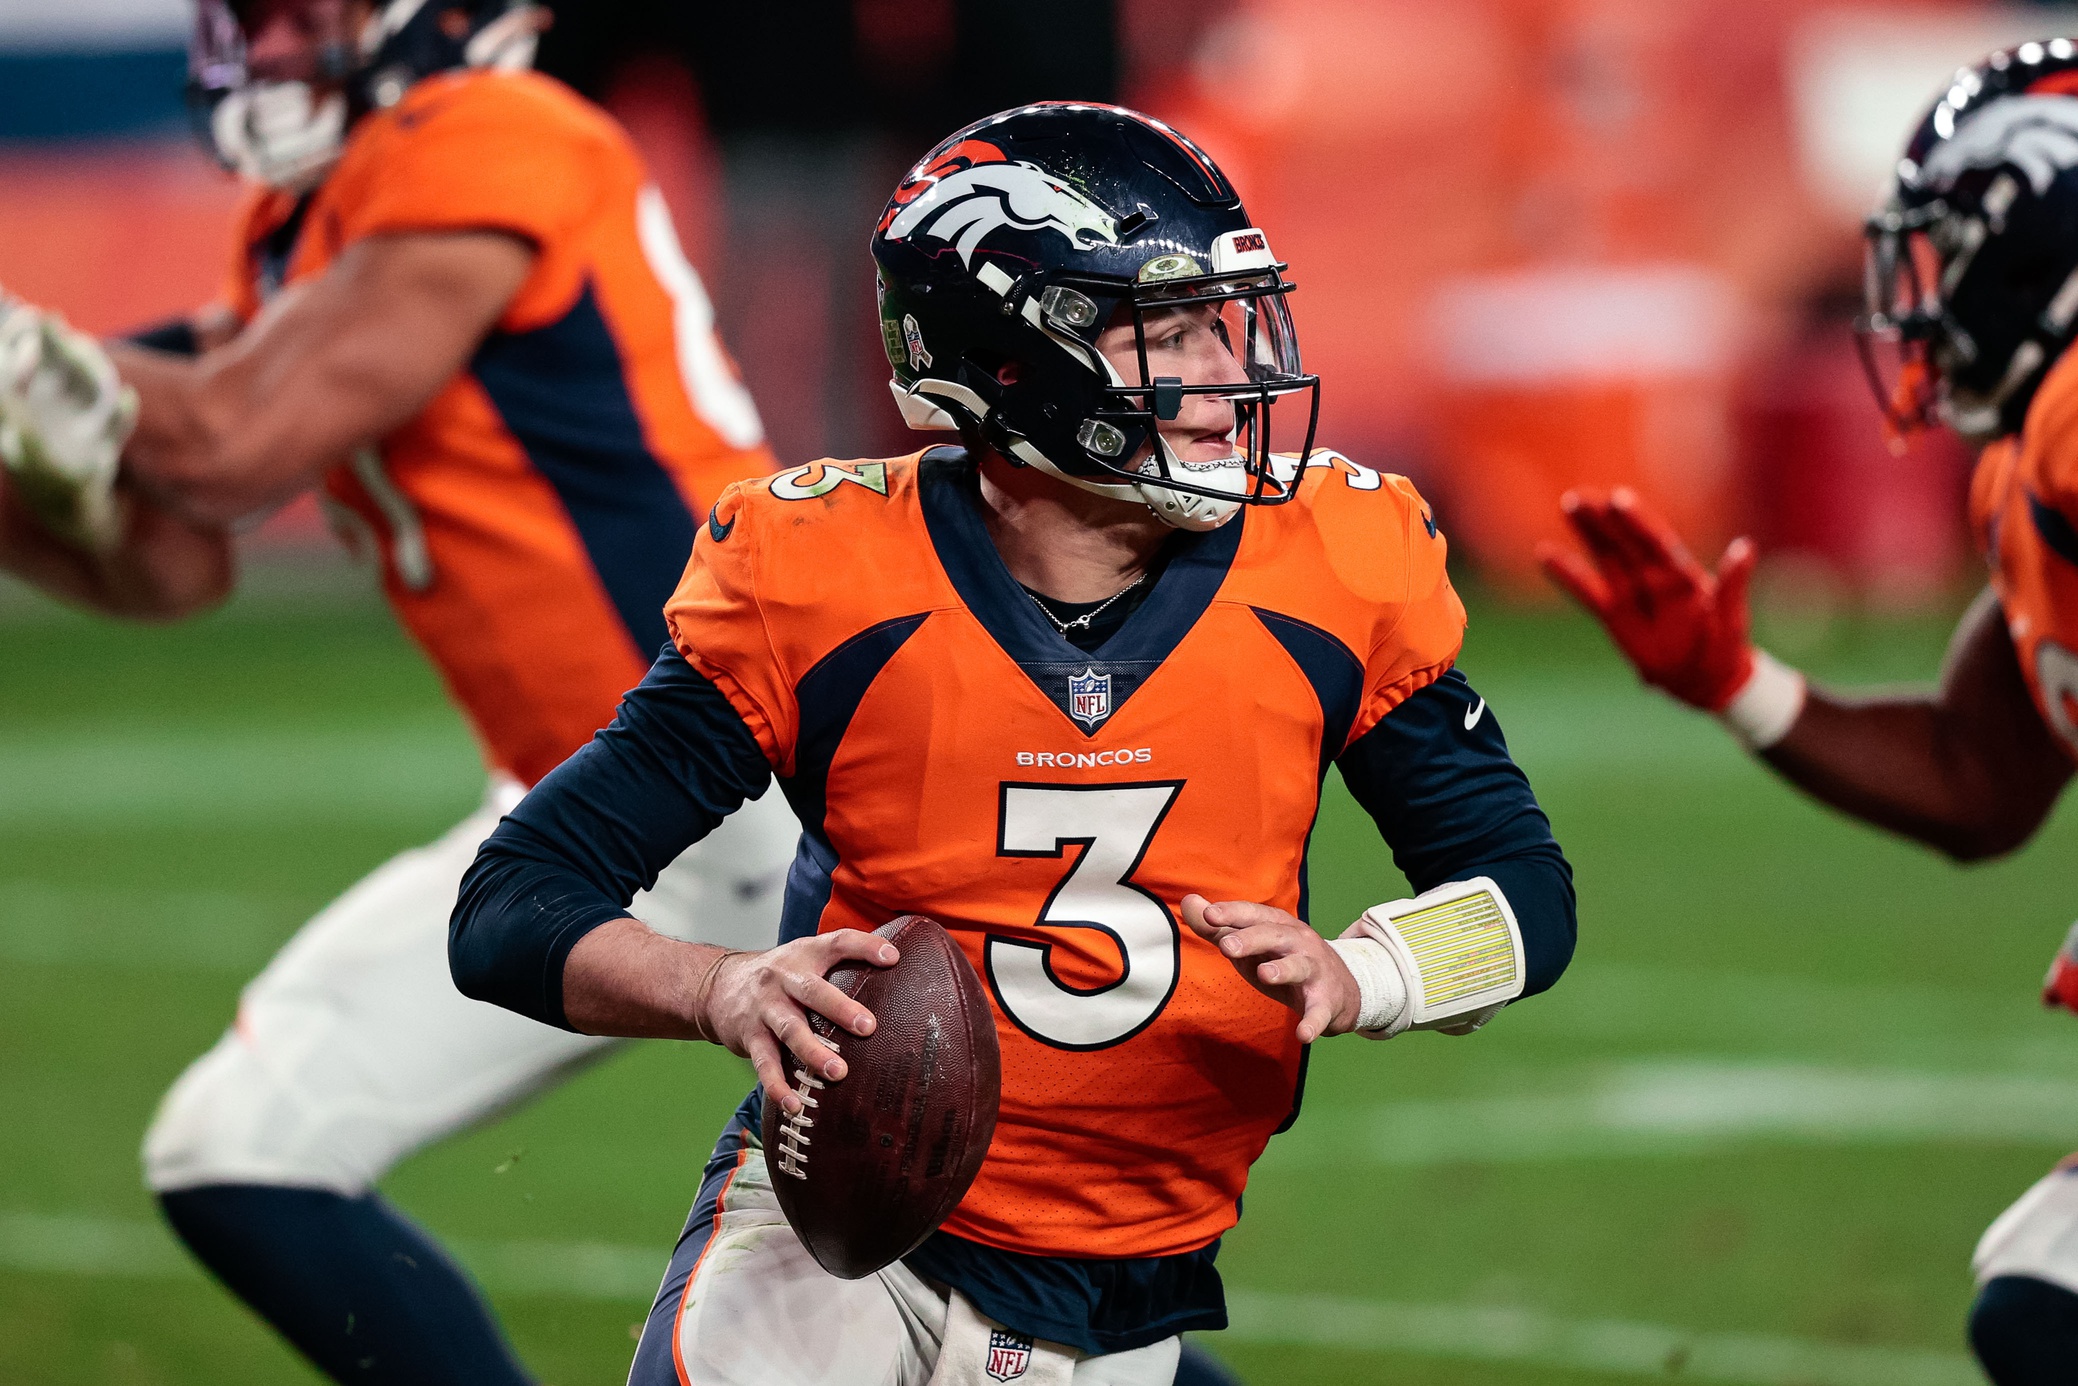 Denver Broncos quarterback Drew Lock (3) looks to pass in the fourth quarter against the Miami Dolphins at Empower Field at Mile High.